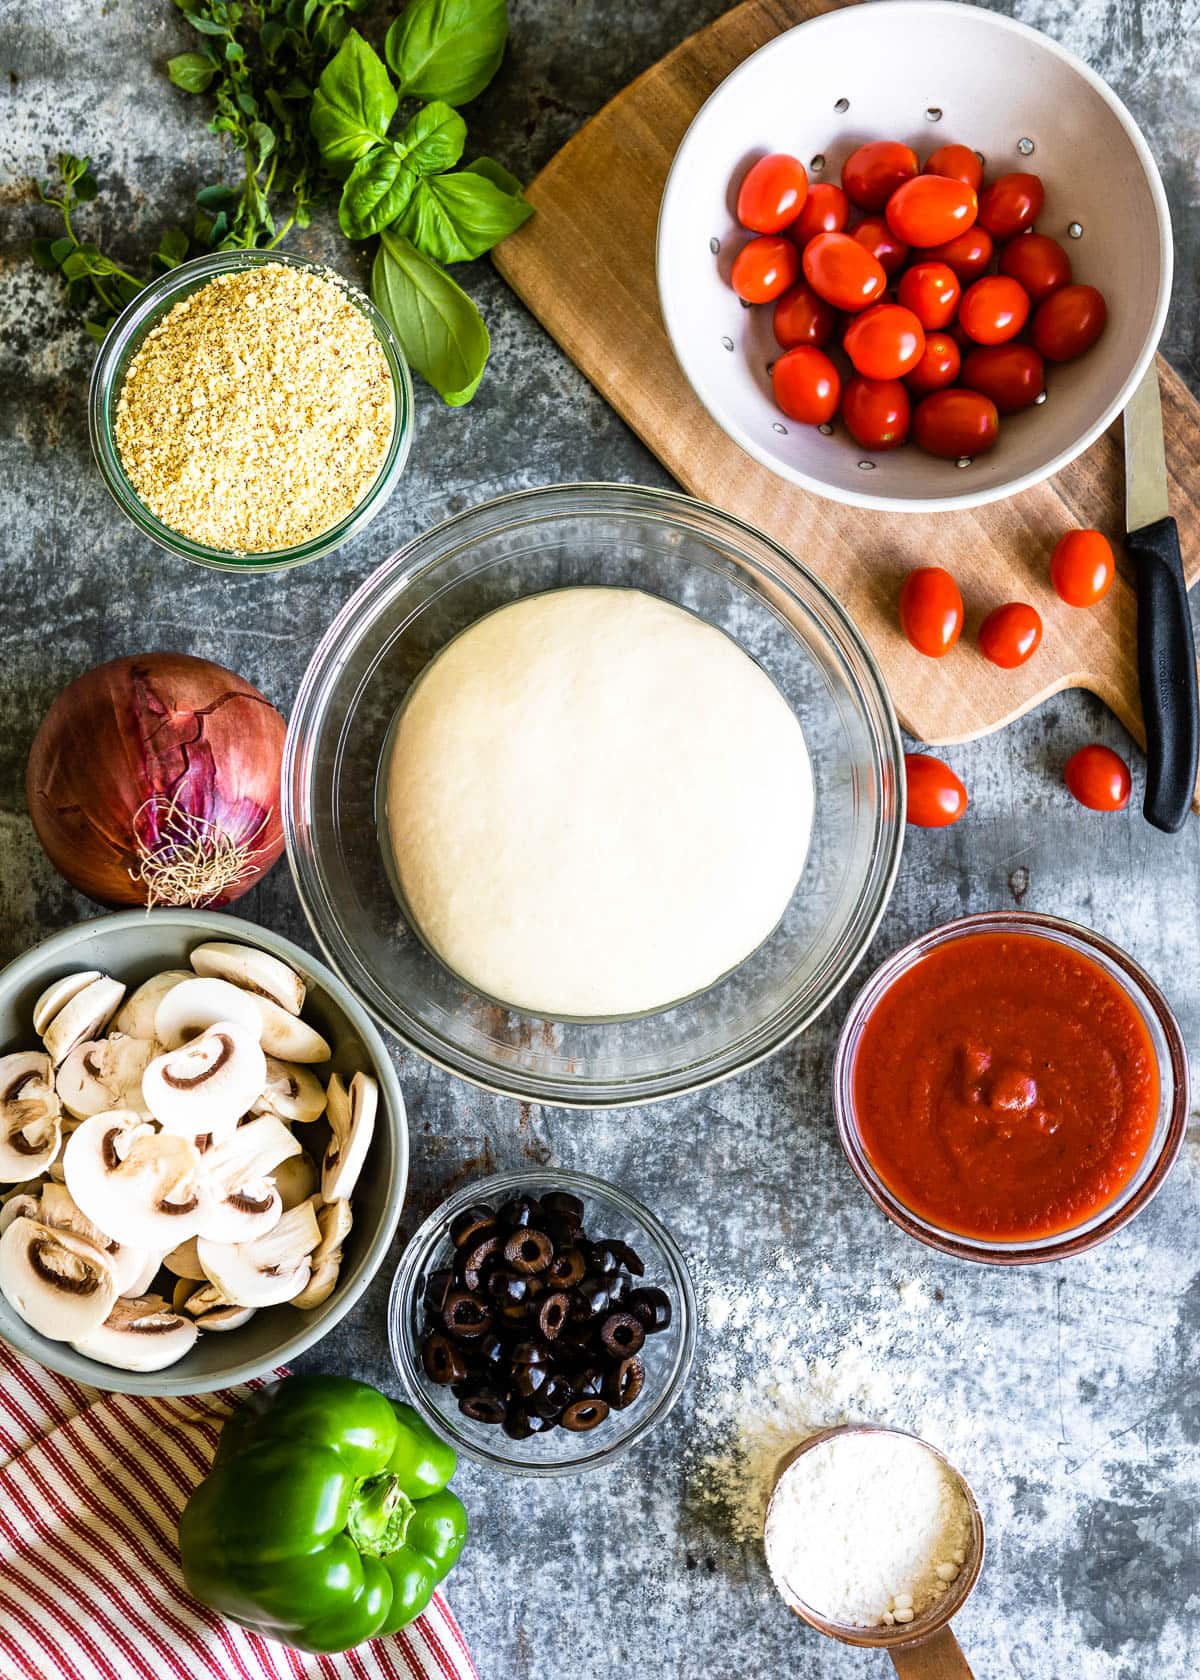 healthy pizza recipes include homemade ingredients like pizza crust.